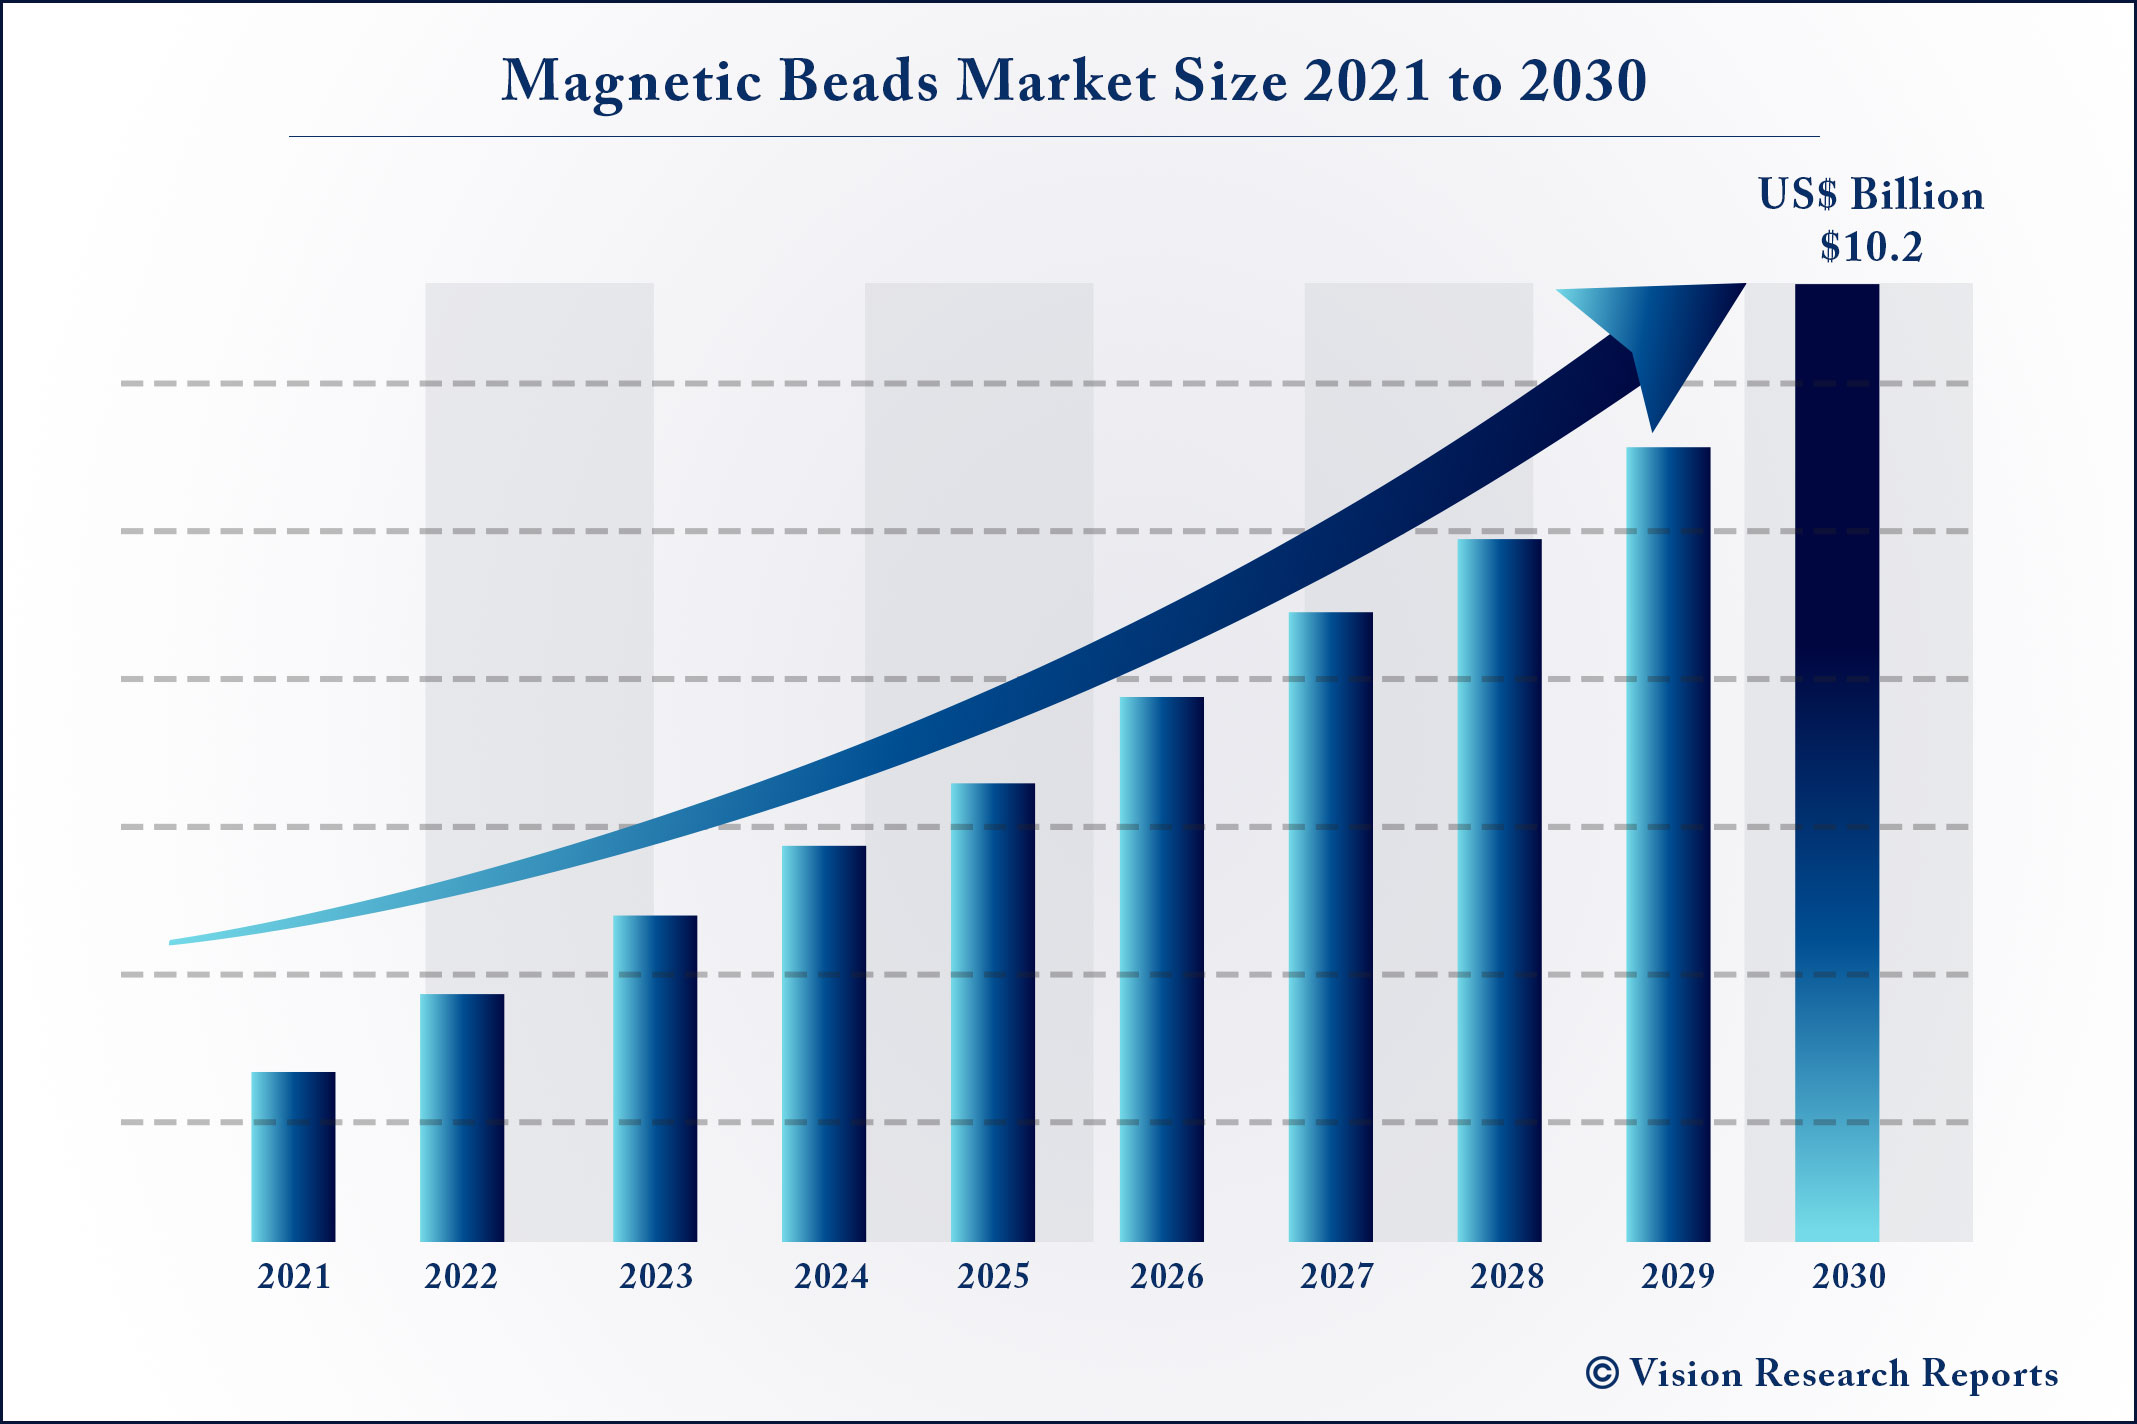 Magnetic Beads Market Size 2021 to 2030